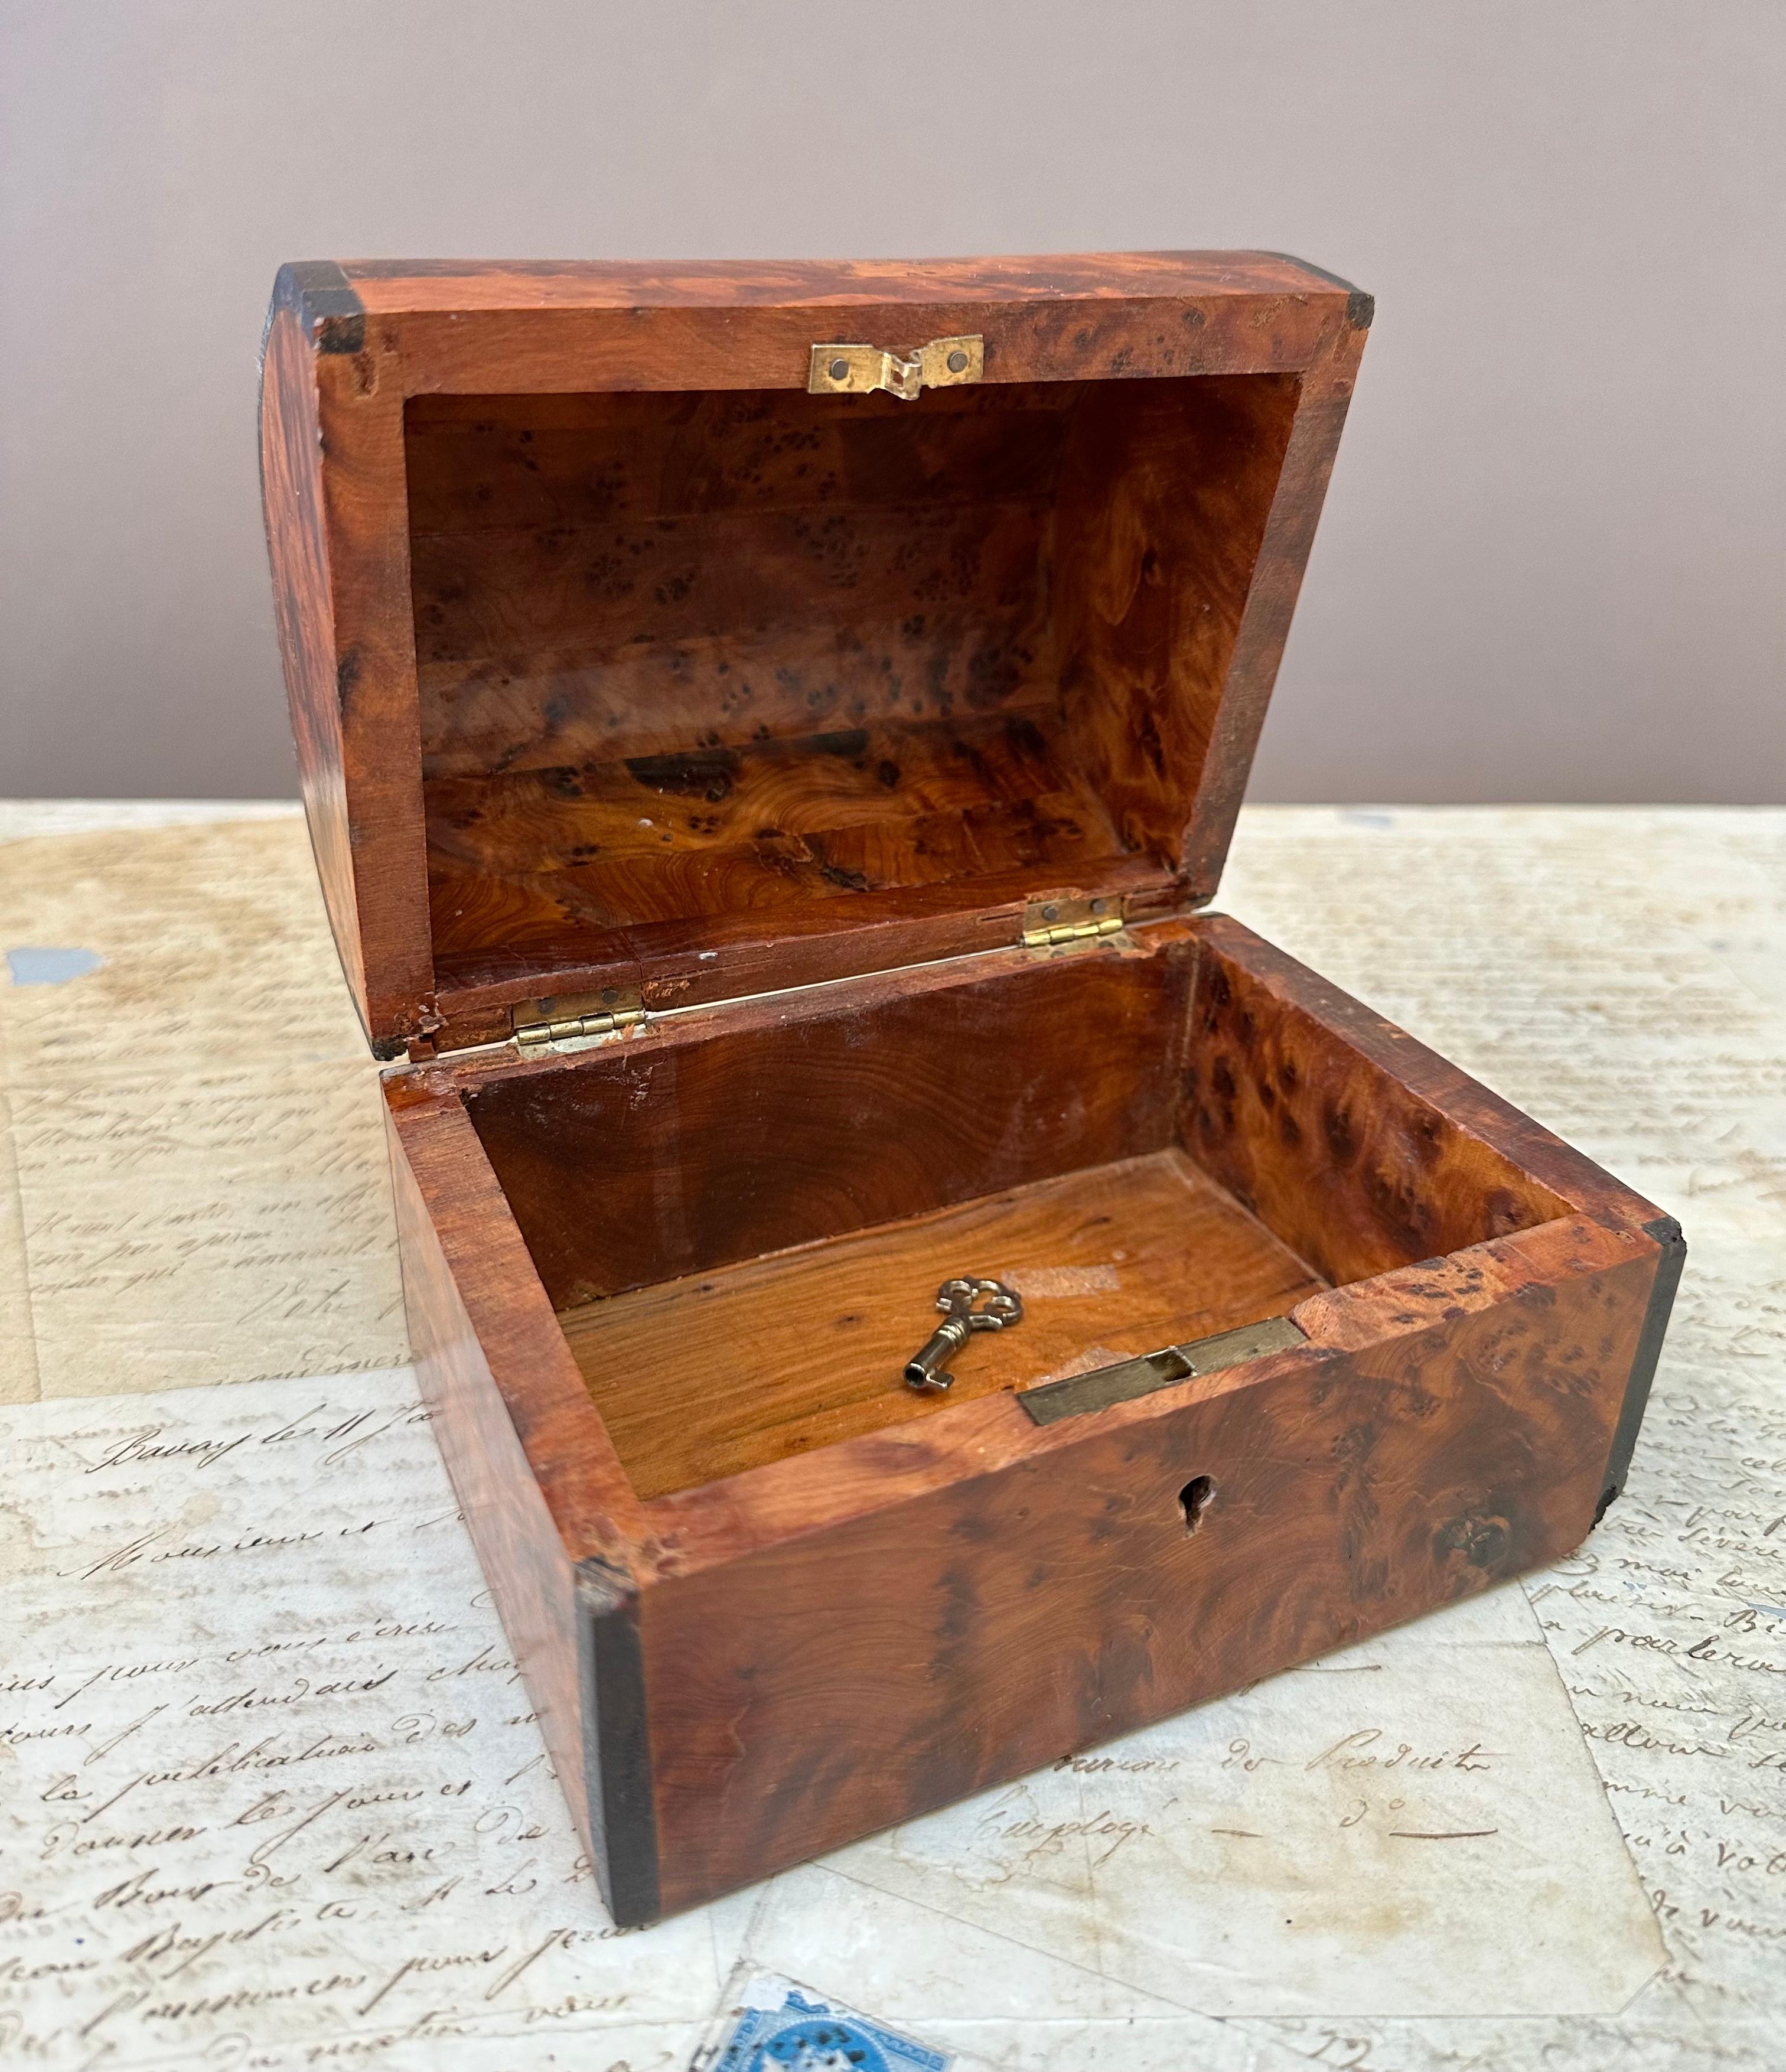 Fine Quality Late 19th Century “Dome“ Shaped Box . Beautifully Crafted, Constructed of “Burled Amboyna Wood” with Ebony edging. Nice small proportions with a deep patination and retaining the original lock and key. Made in France circa 1900